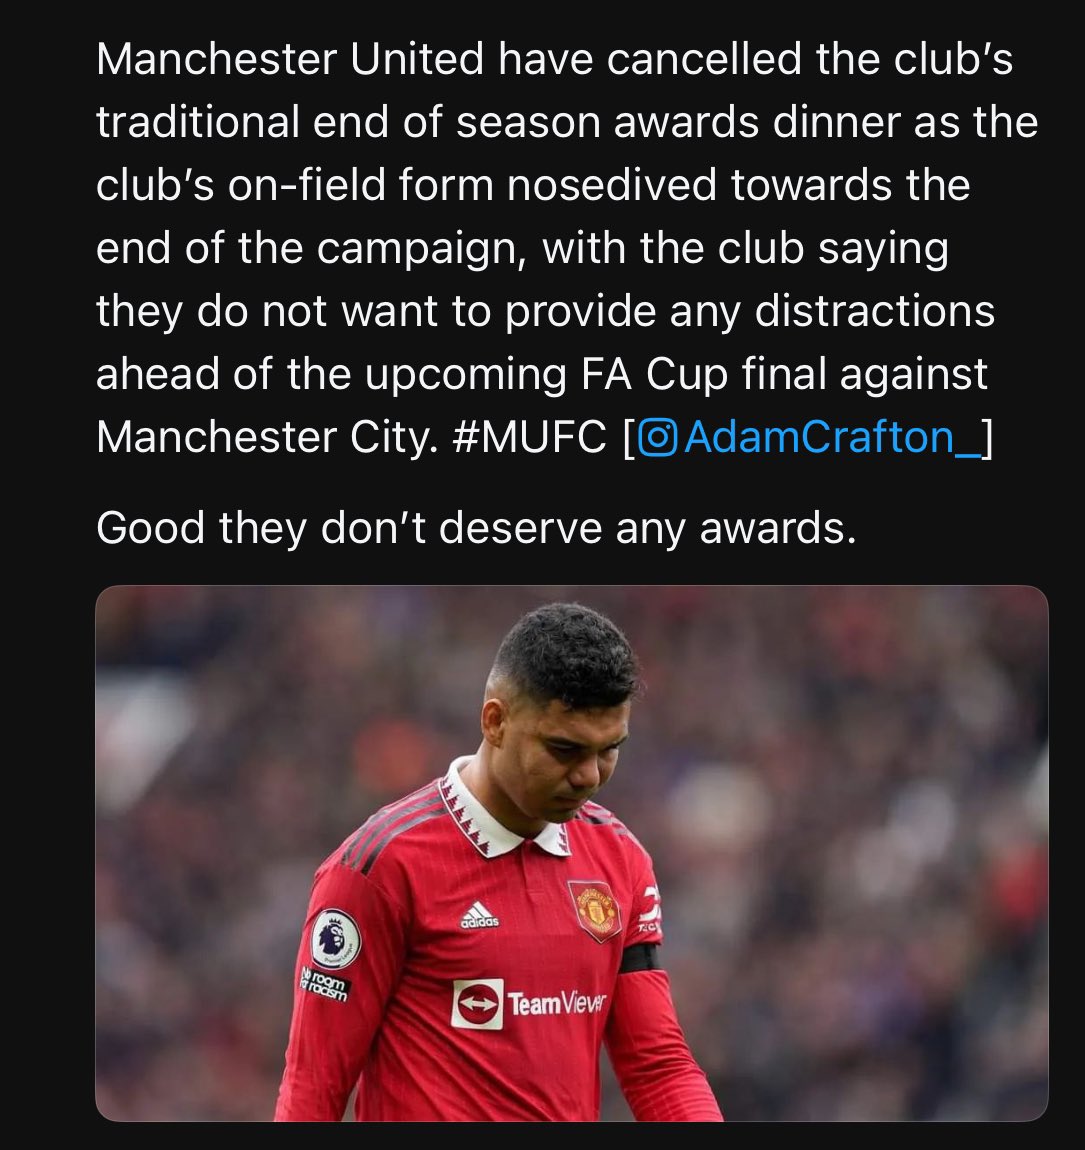 Just right but for a laugh , what award would offer any certain player and why ?? I’ll go first , player who you expected to score a bucket goals but couldn’t be arsed as to much effort goes to Oxfam rashford 😂